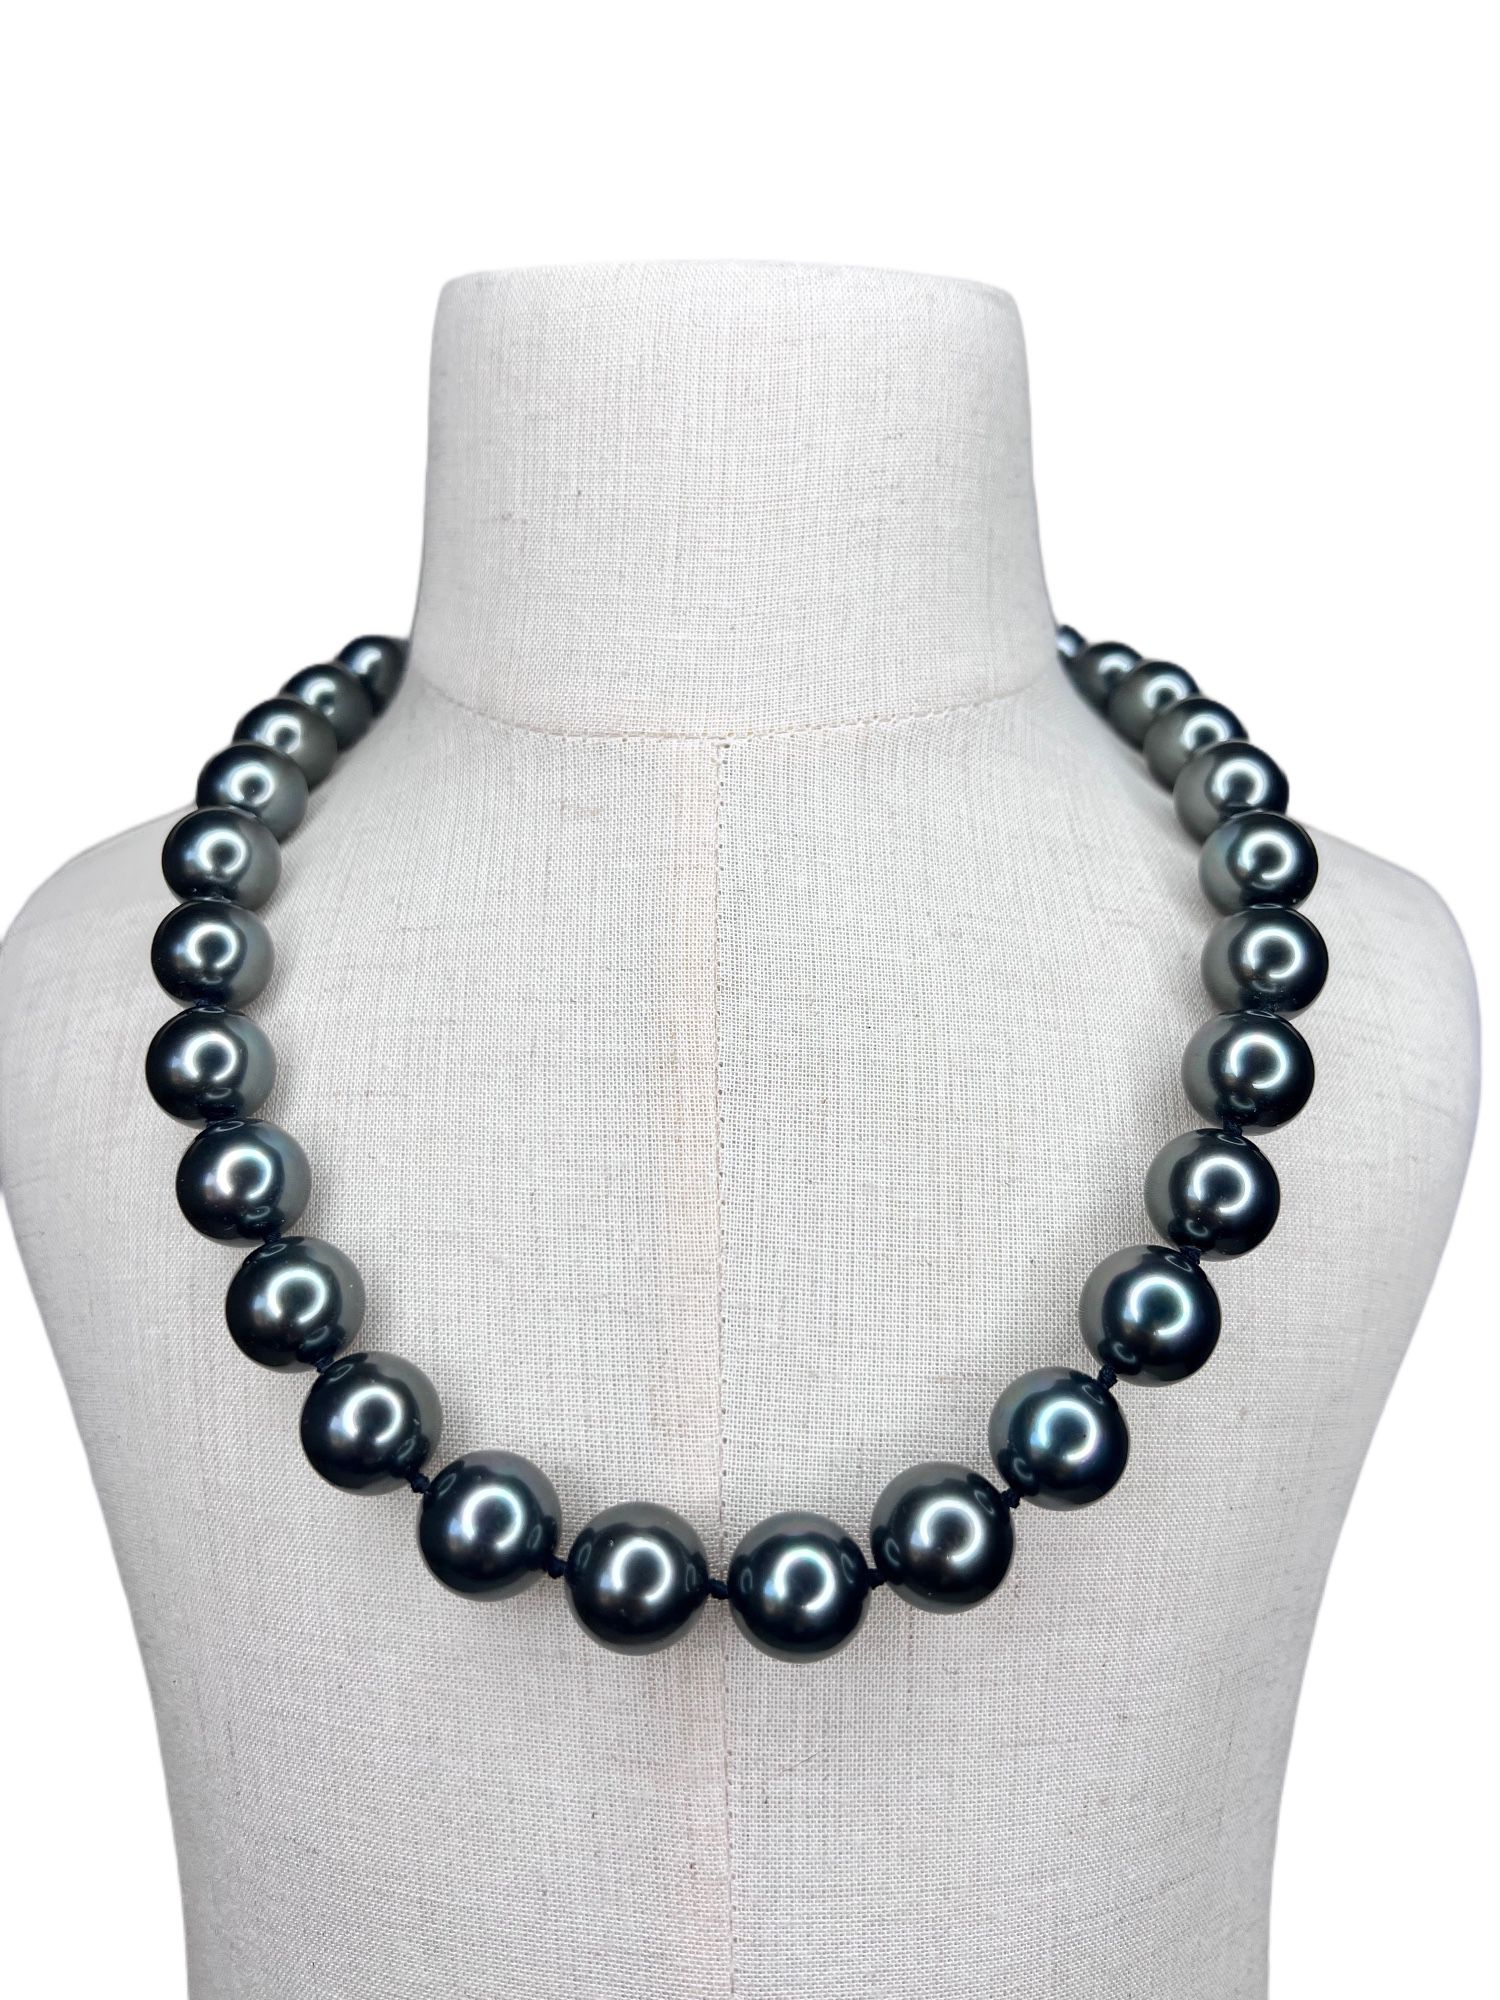 M&N 925 Raven color large faux pearl strand collar necklace